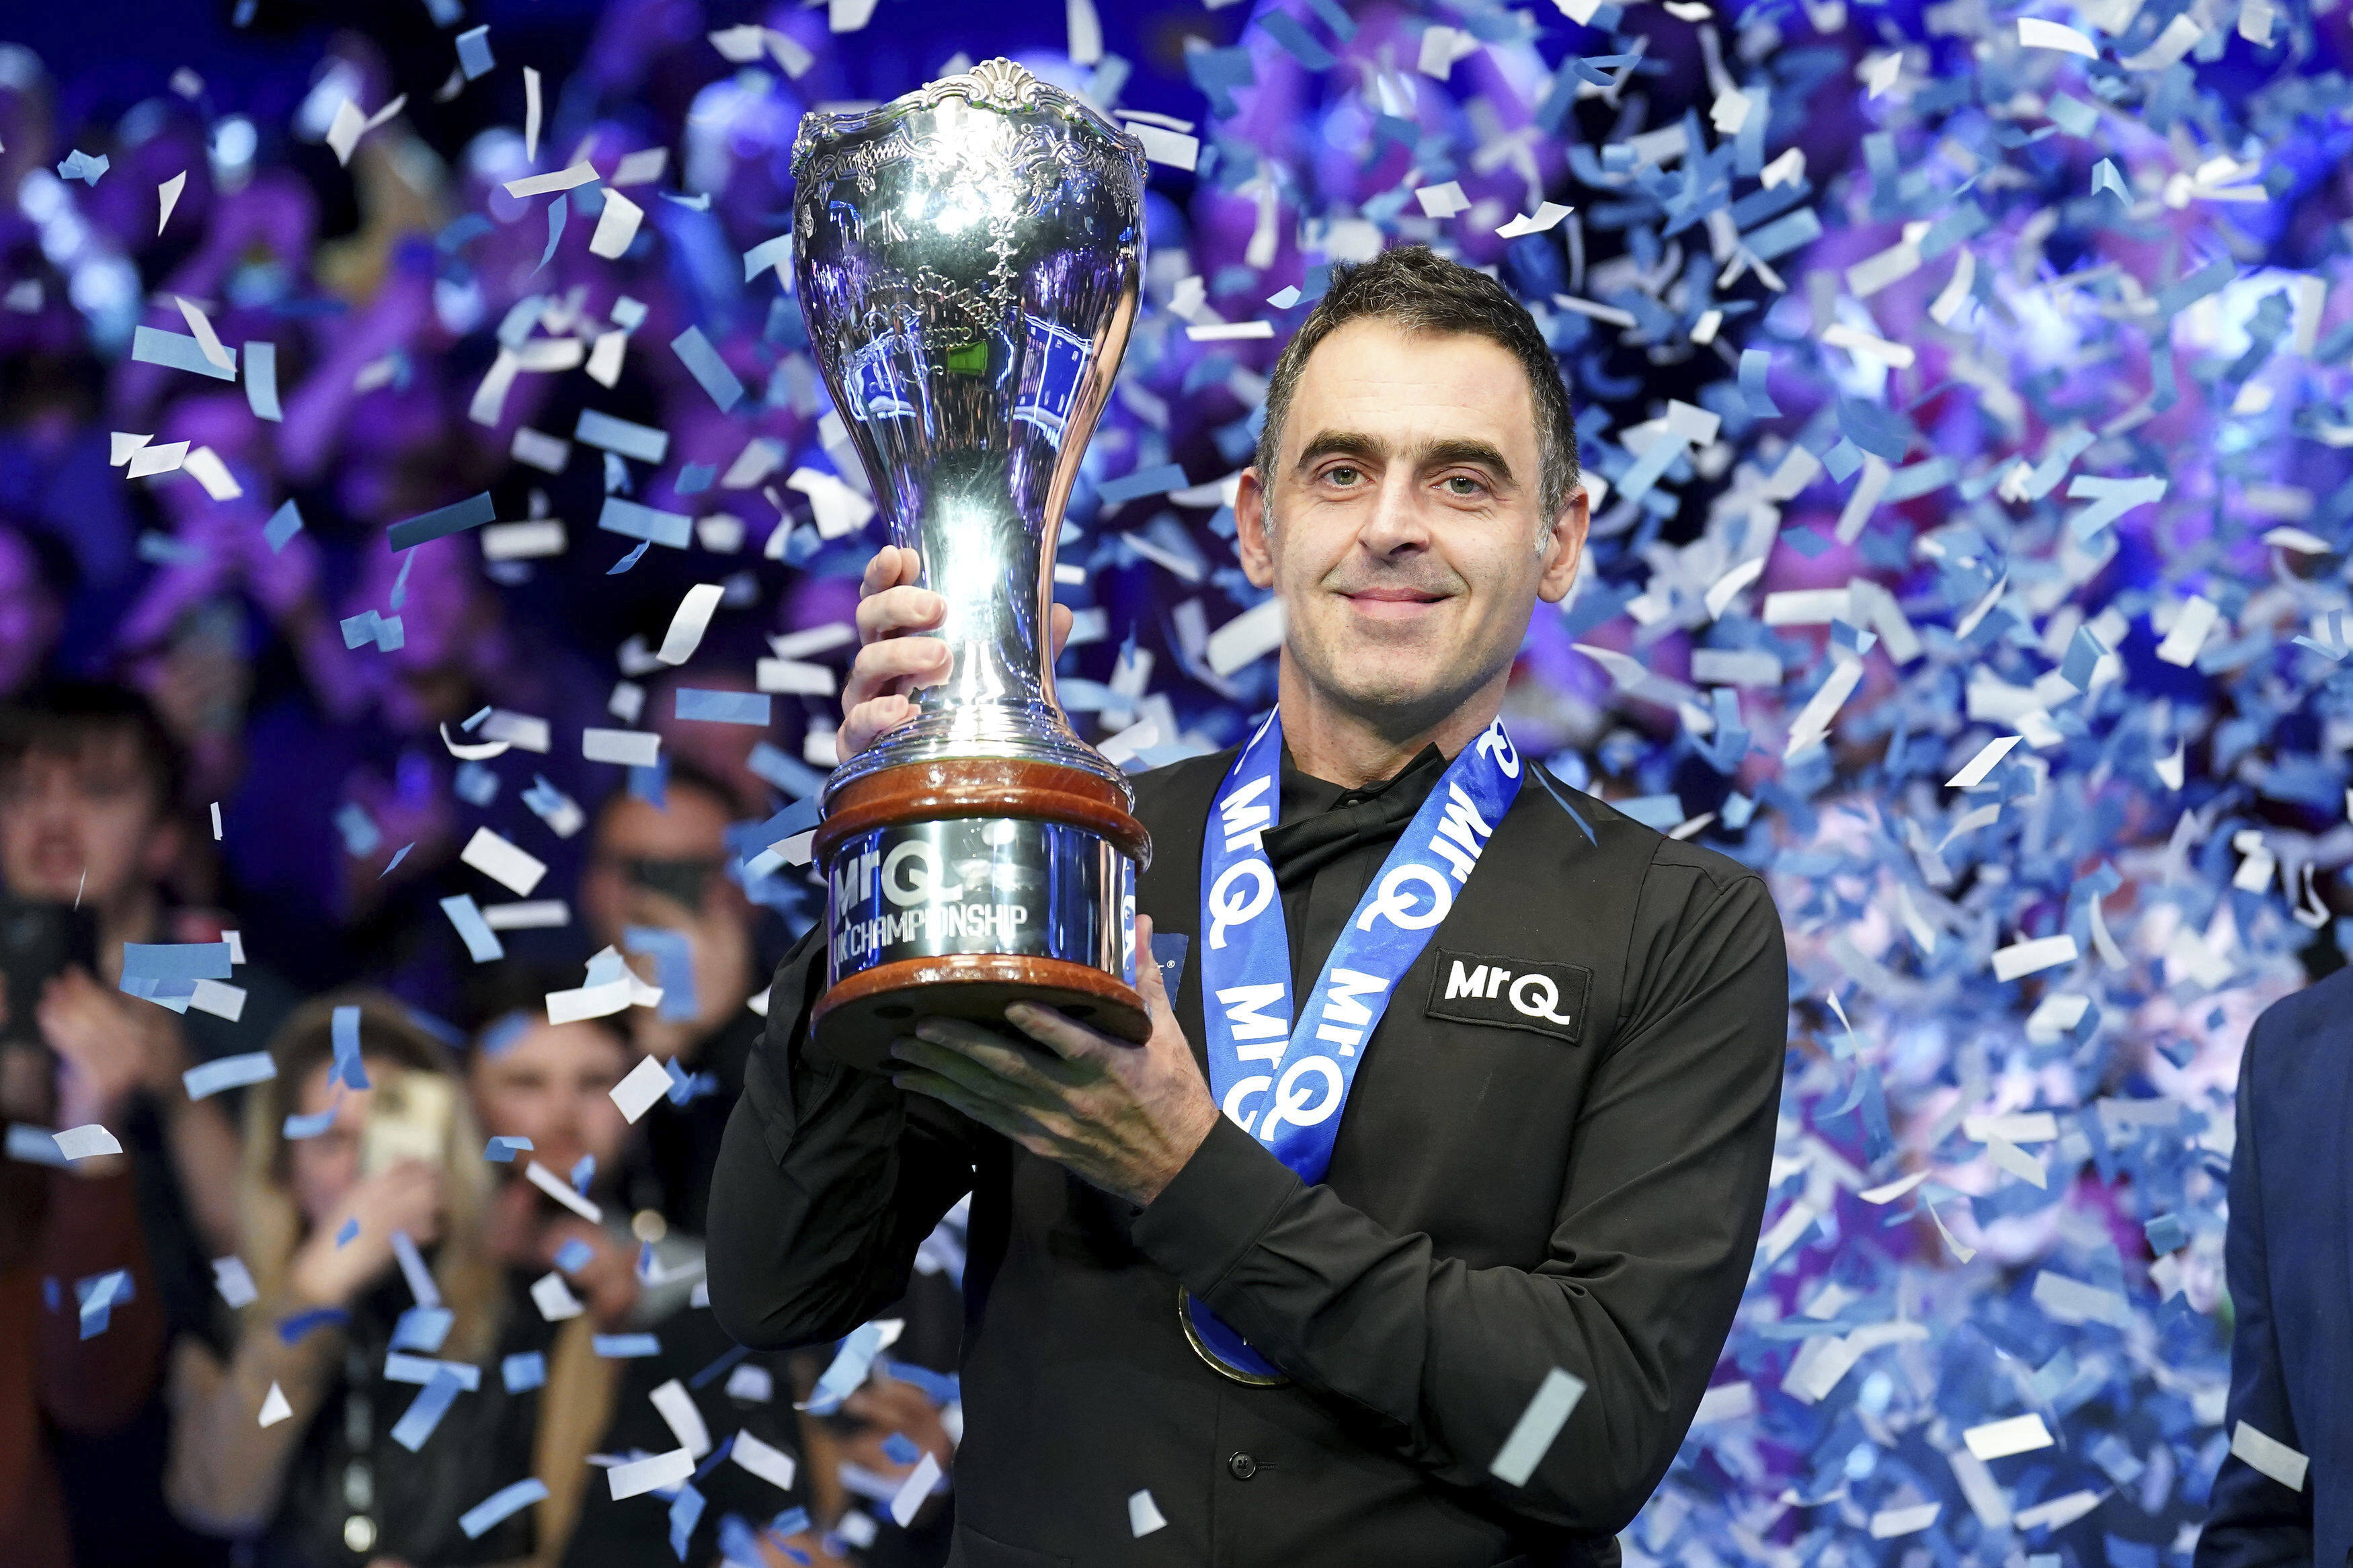 Ronnie O’Sullivan celebrates with the trophy after winning the UK Championship for a record eighth time. Photo: AP